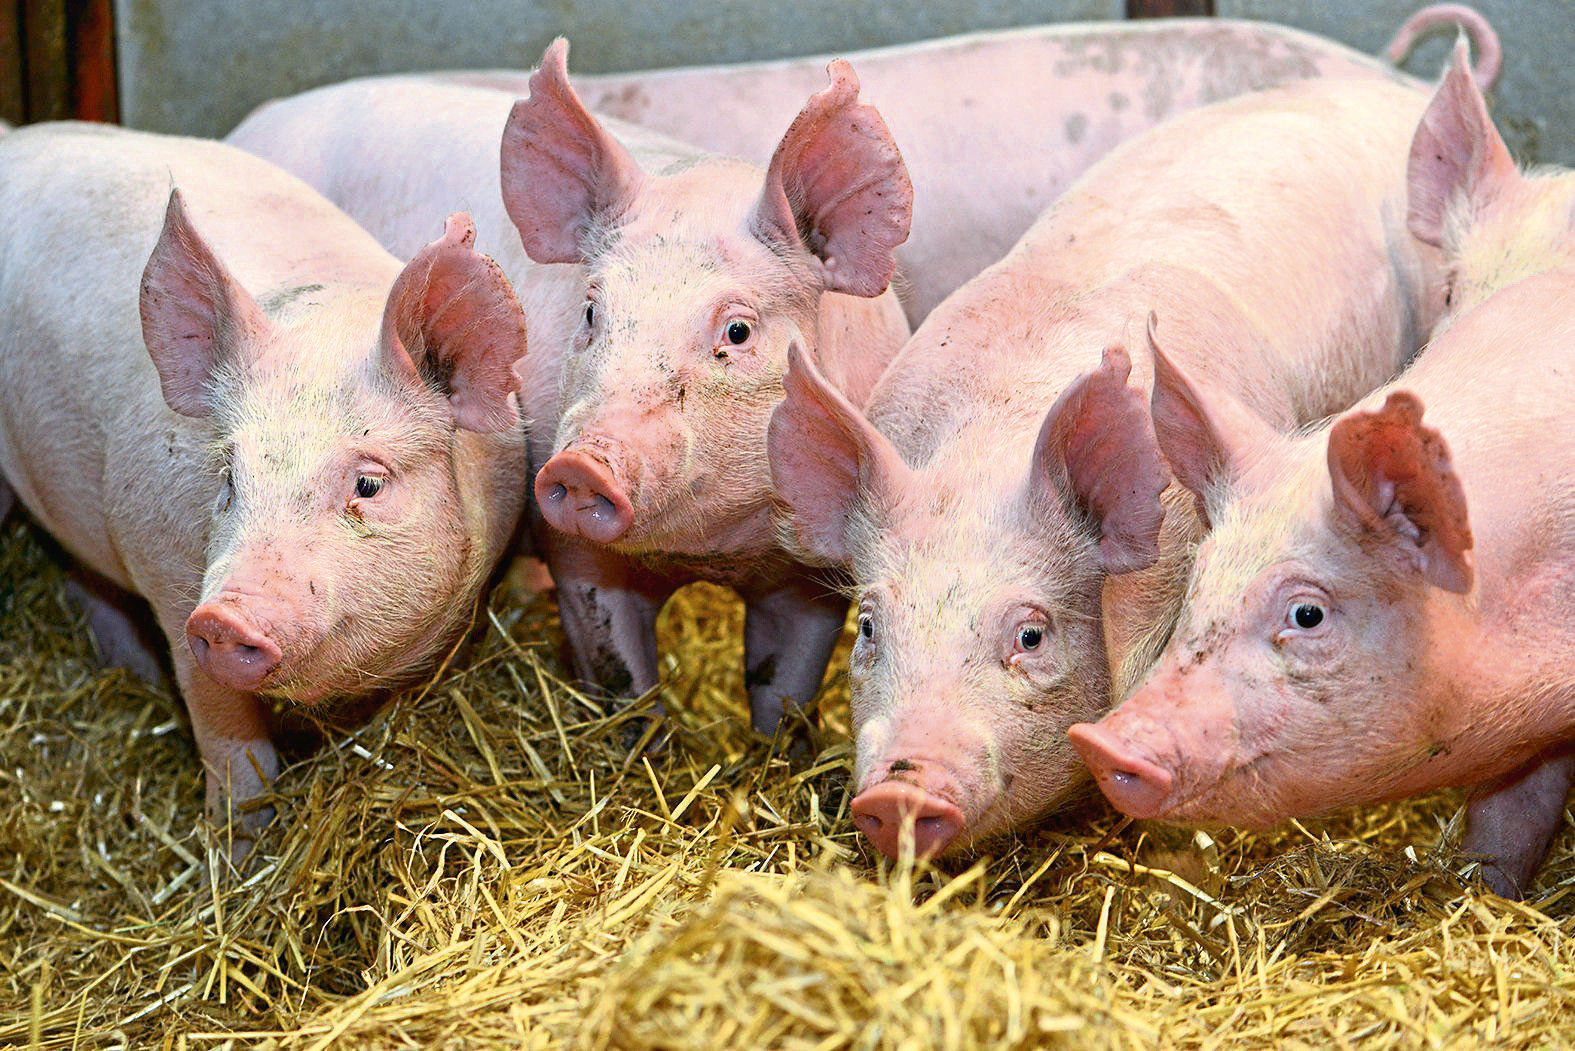 UK pig producers could benefit from demand for pork in Vietnam.